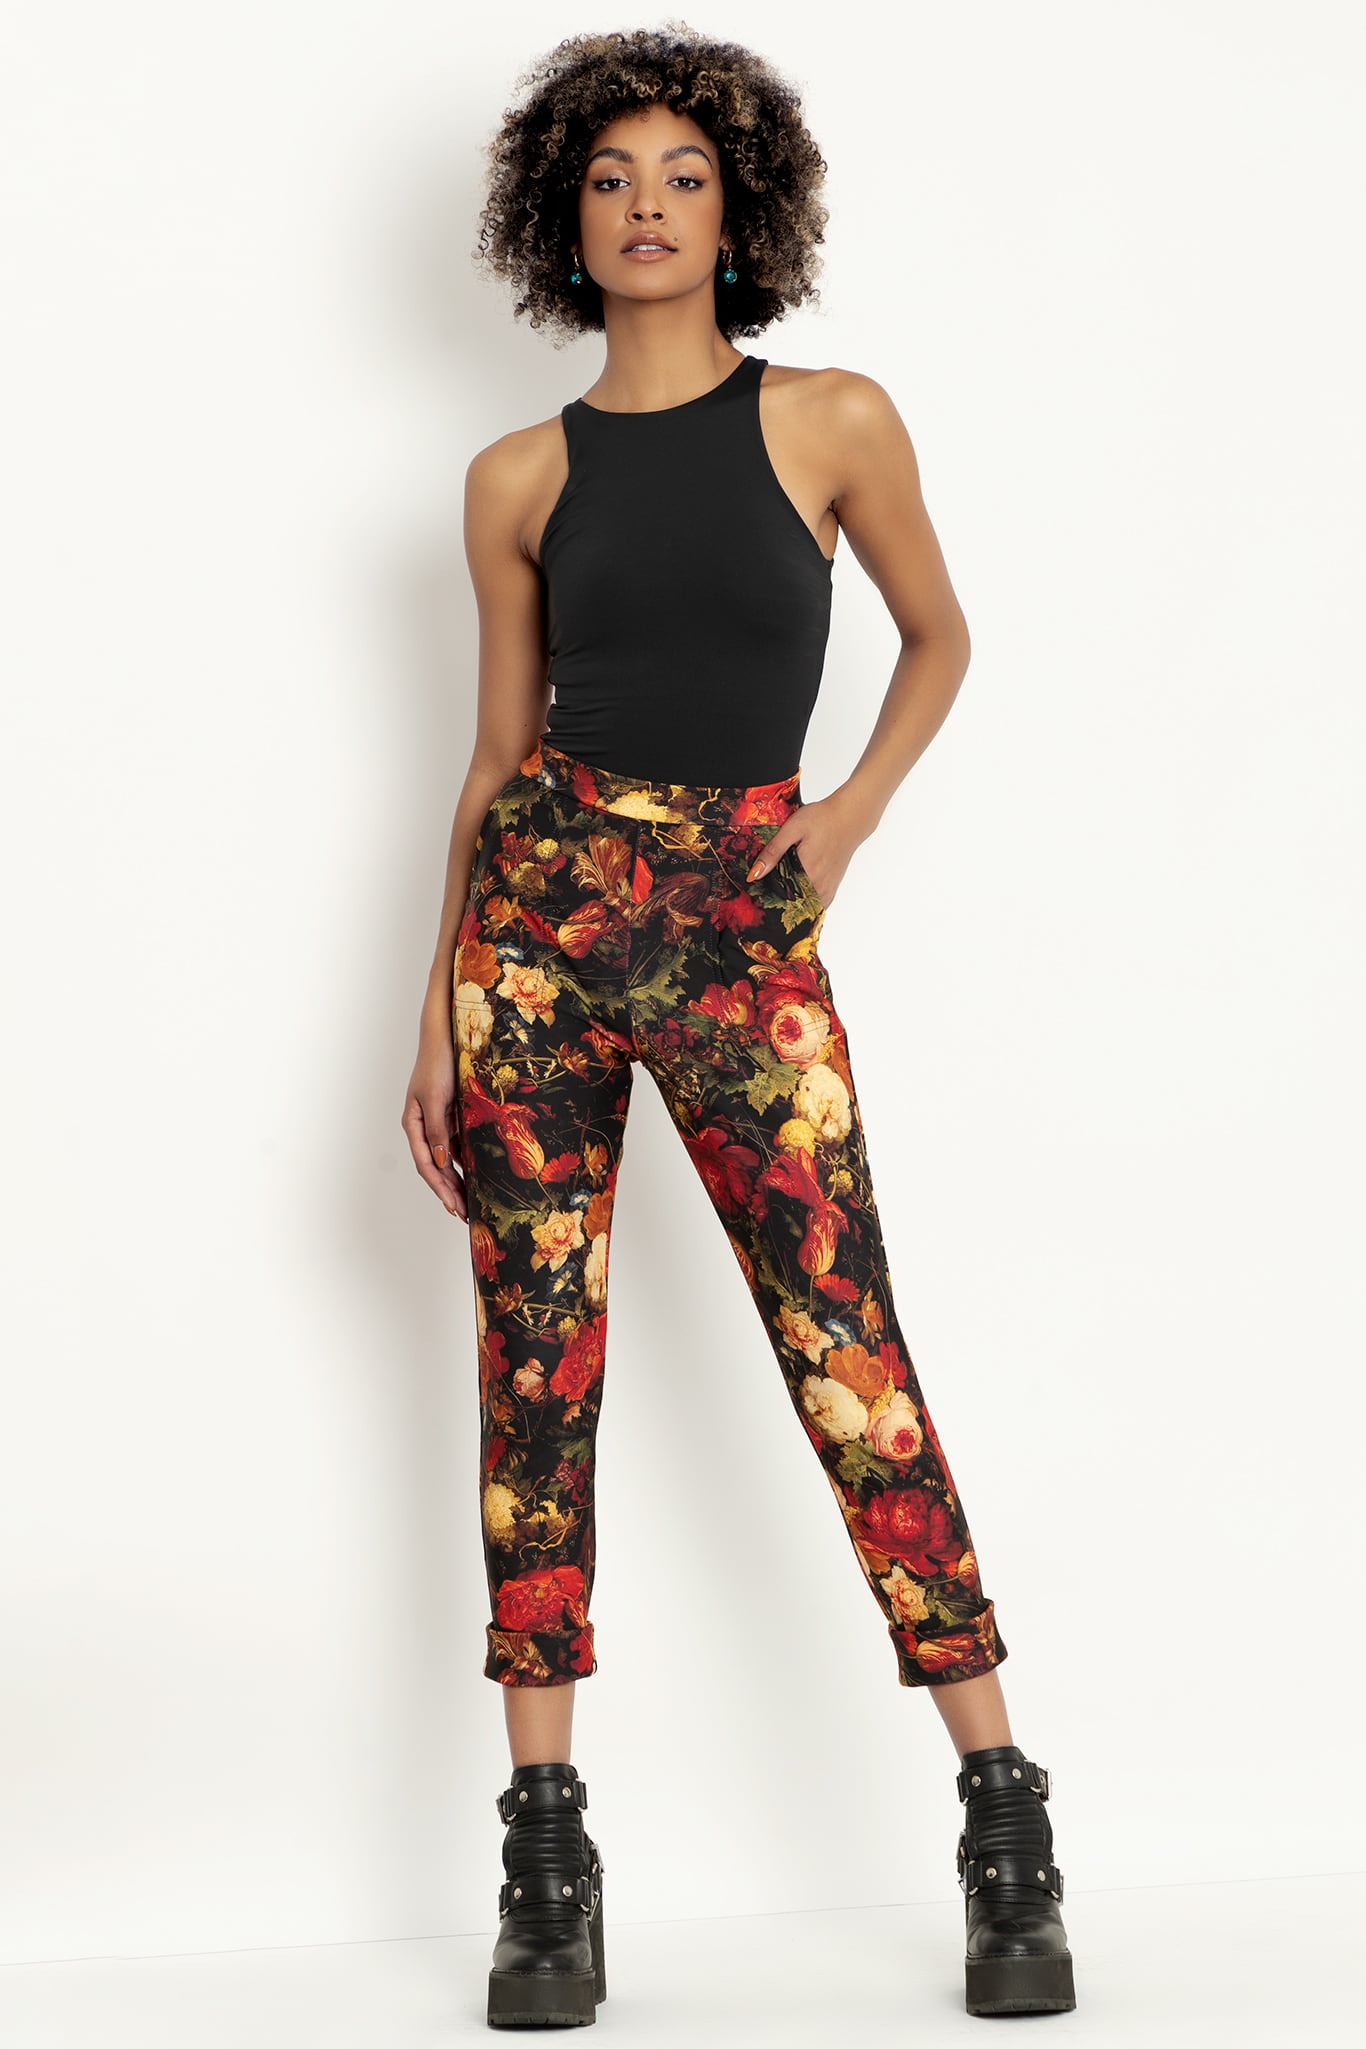 & Other Stories wide leg pants in black ditsy floral print | ASOS